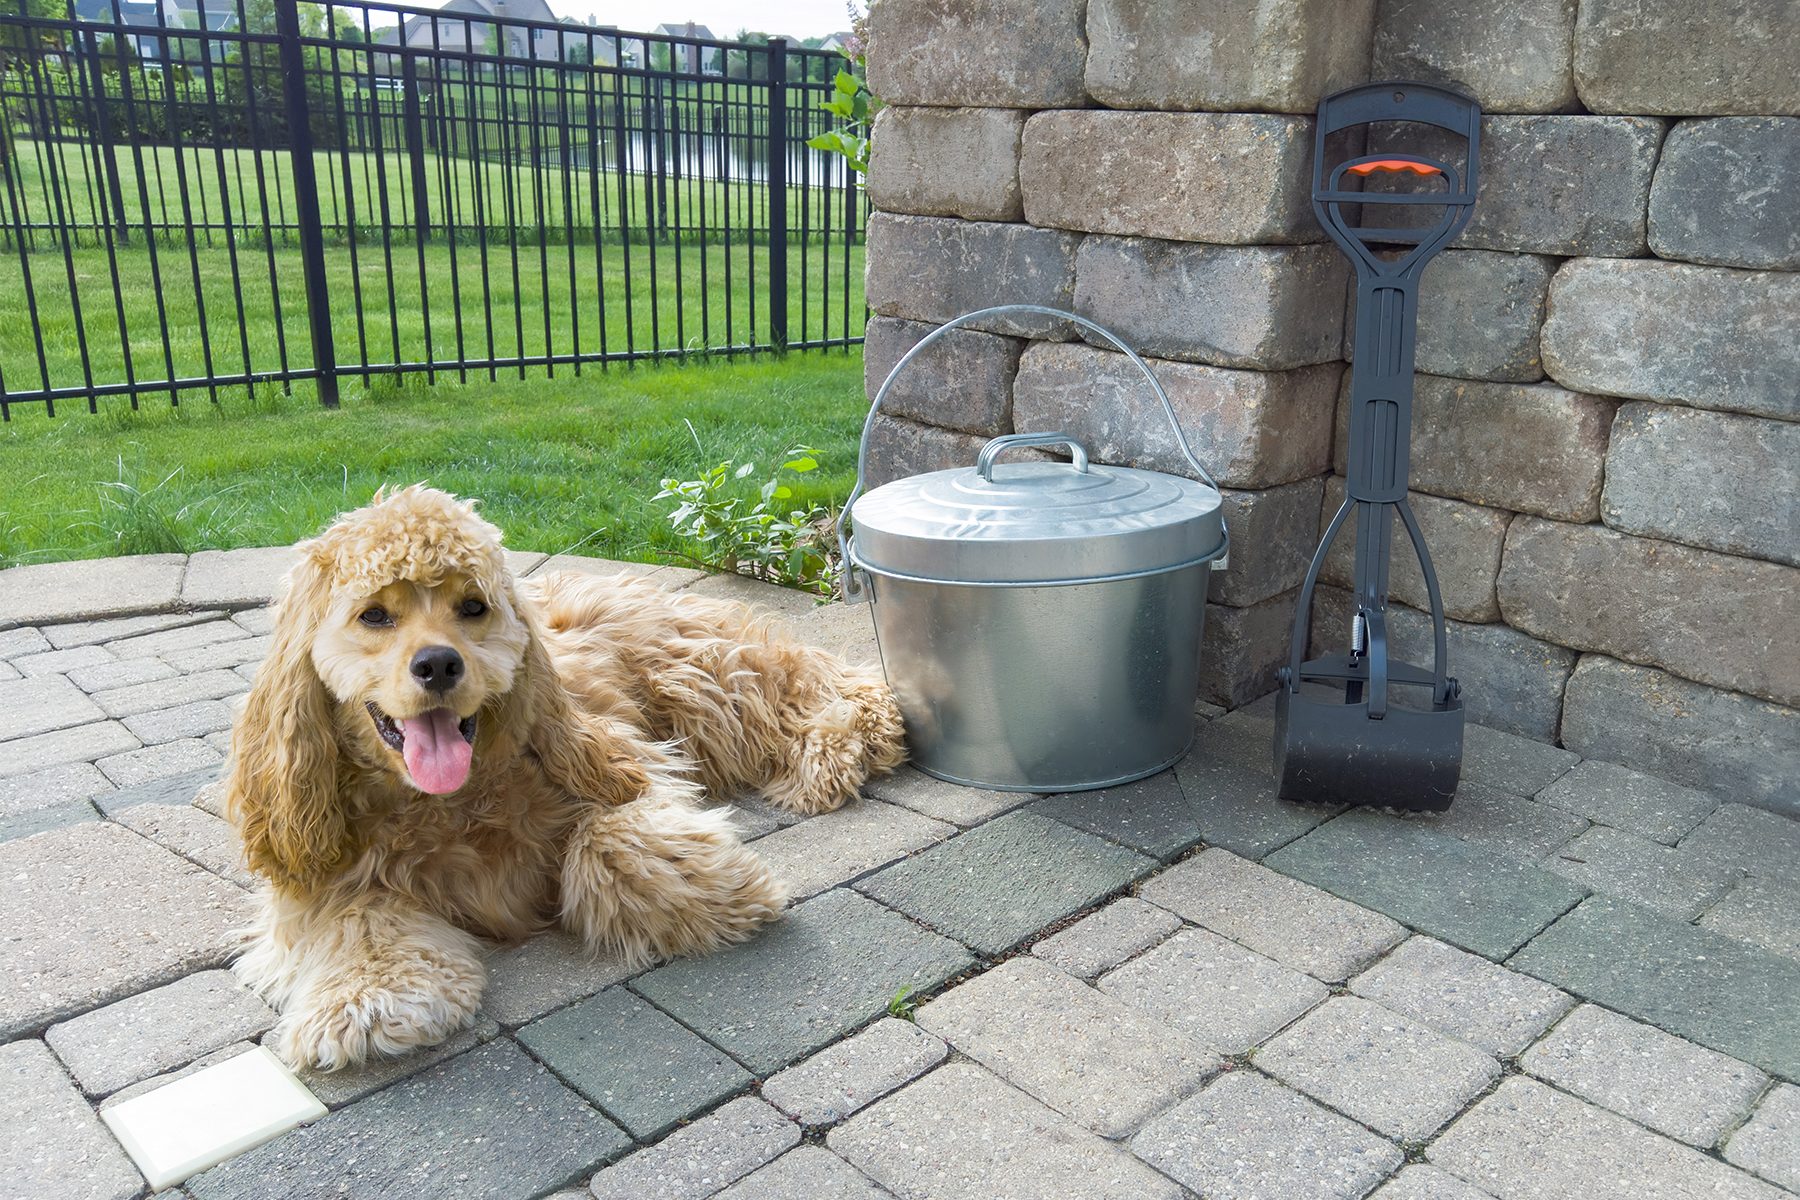 Why You Should Pick Up Dog Poop Before Mowing Your Lawn